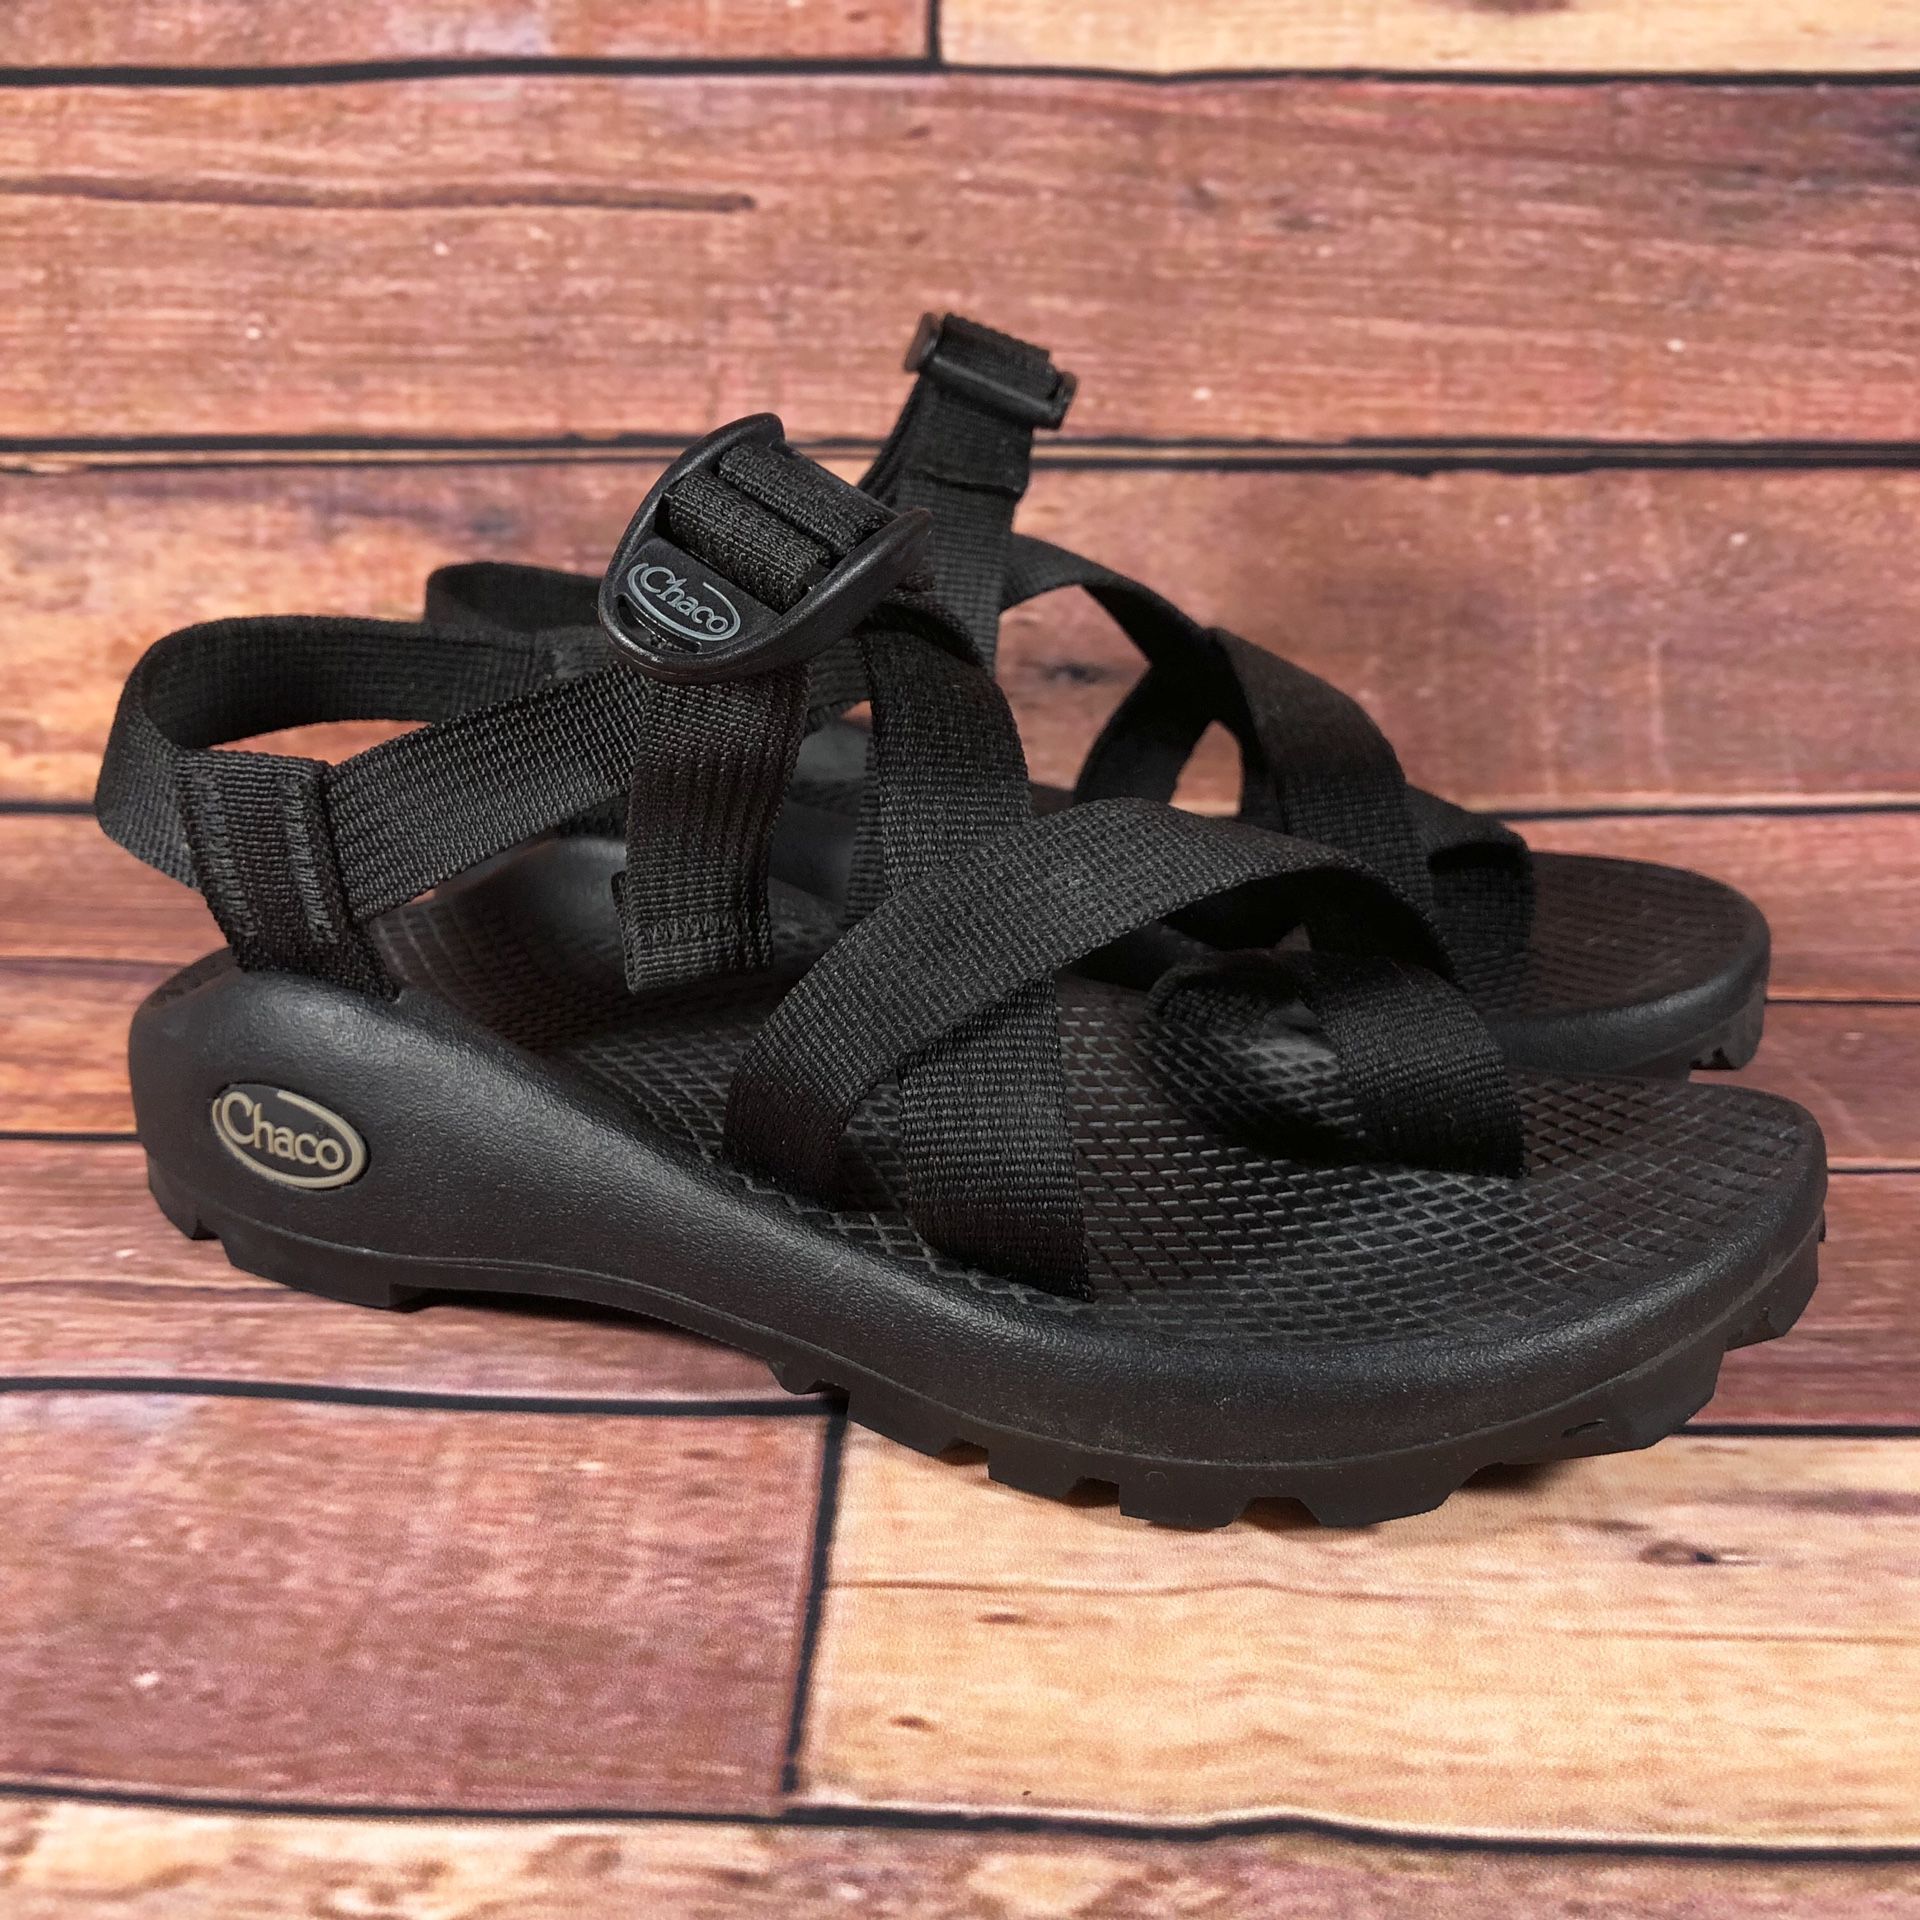 Chaco Z2 Classic Toe Strap Sandals Hiking Vibram Athletic Outdoor Womens Size 5